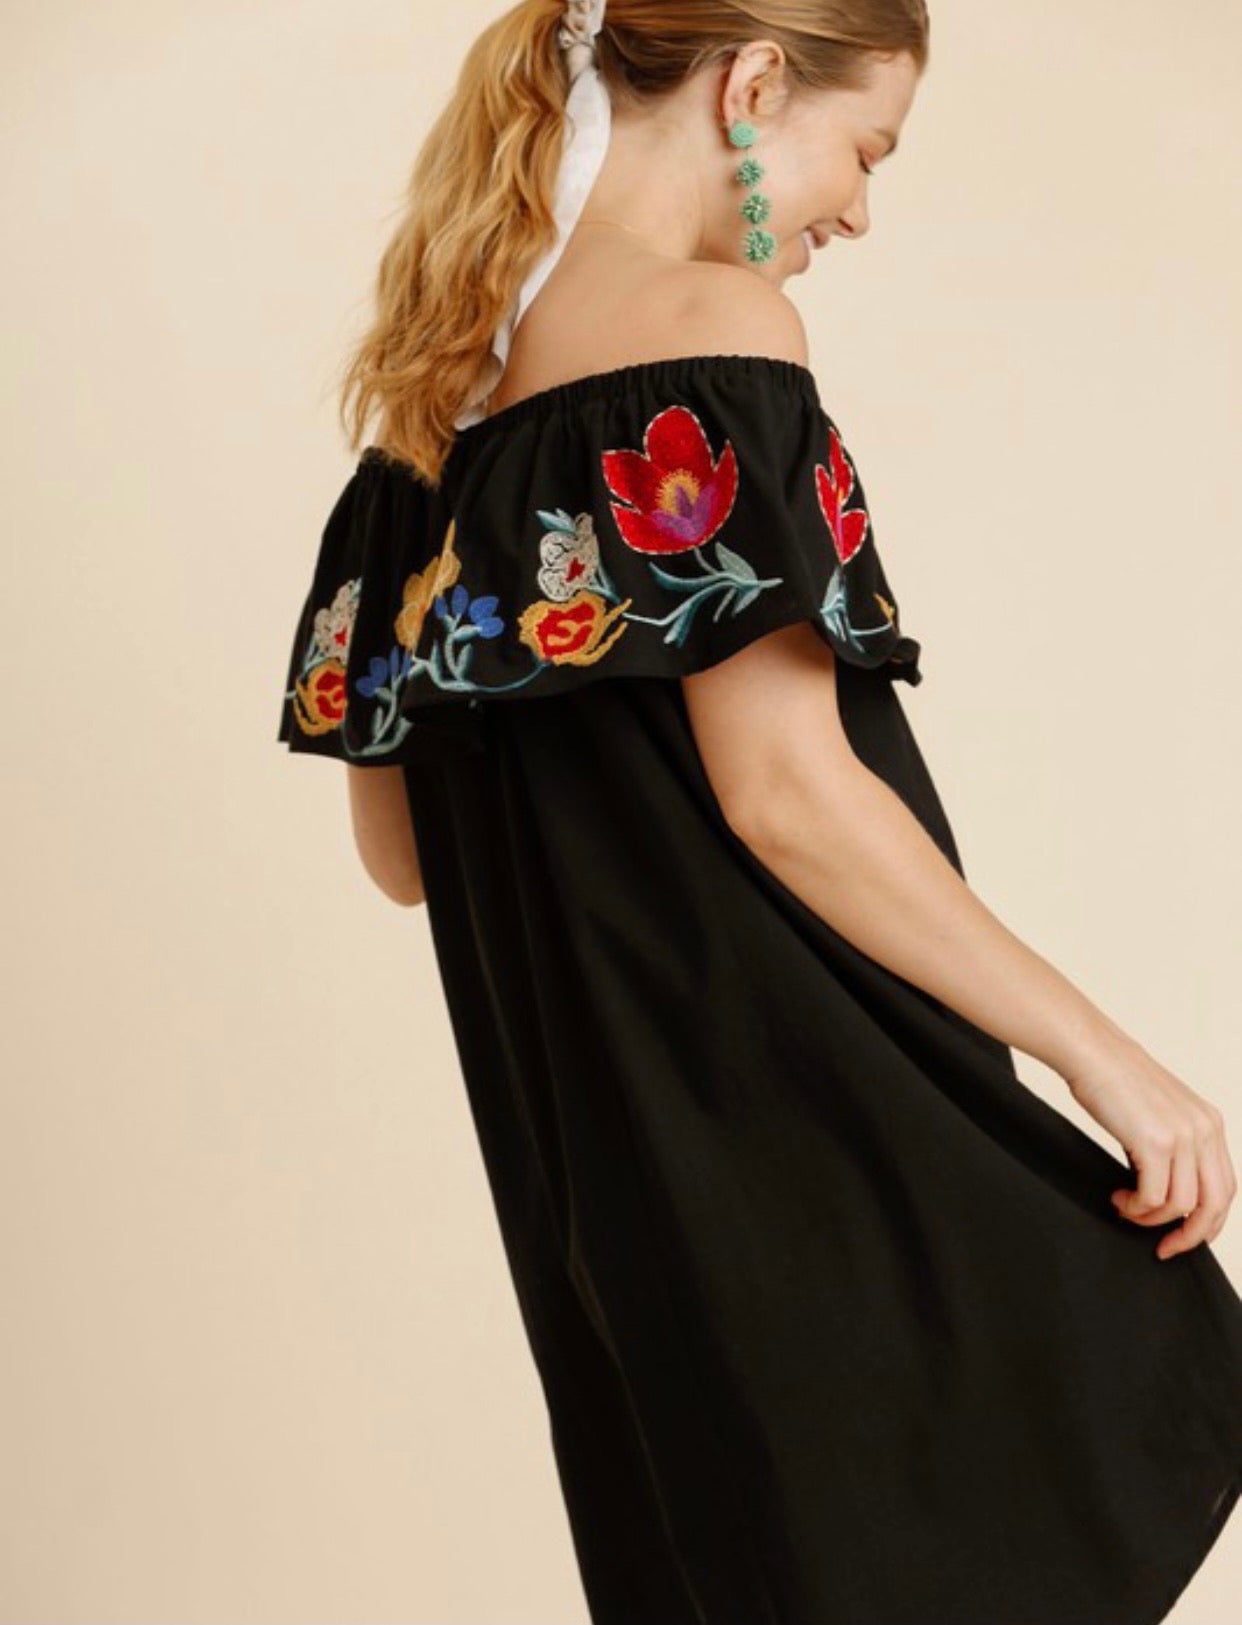 Sunset Stroll Embroidered Dress